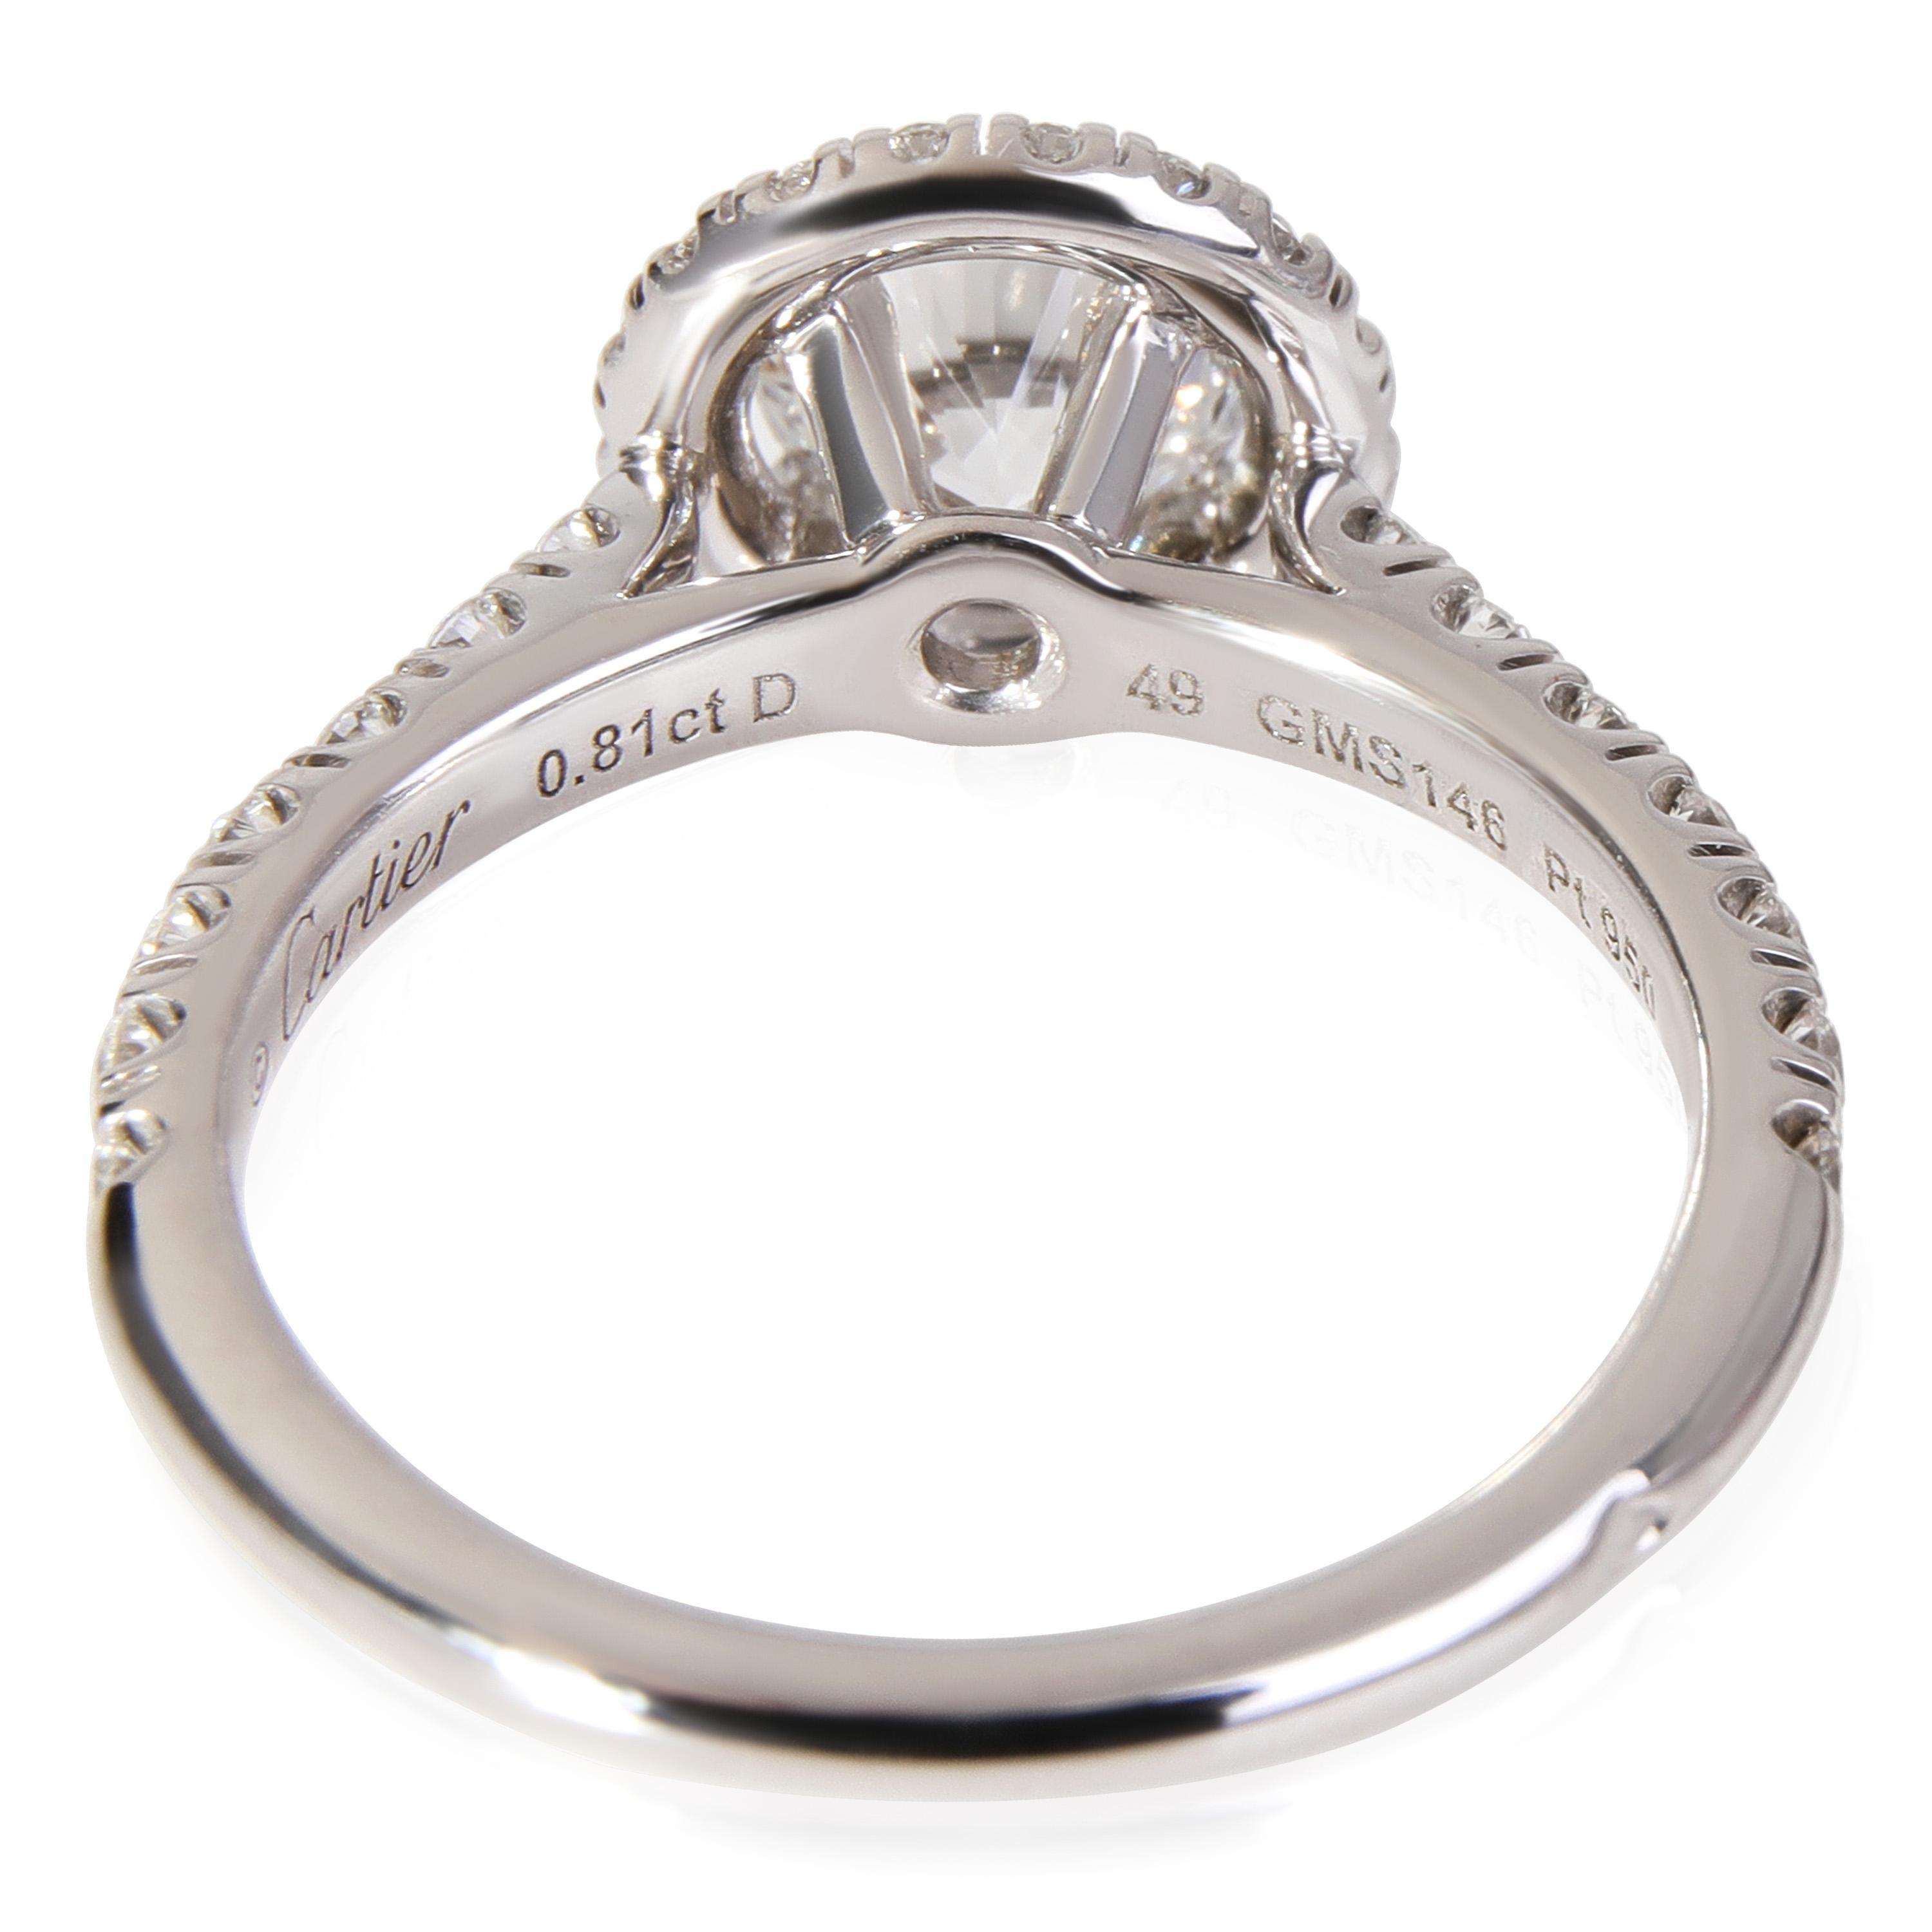 Cartier Destinee Halo Diamond Engagement Ring in Platinum D/IF 1.31 ctw

PRIMARY DETAILS
SKU: 121321
Listing Title: Cartier Destinee Halo Diamond Engagement Ring in Platinum D/IF 1.31 ctw
Condition Description: Retails for 21700 USD. In excellent